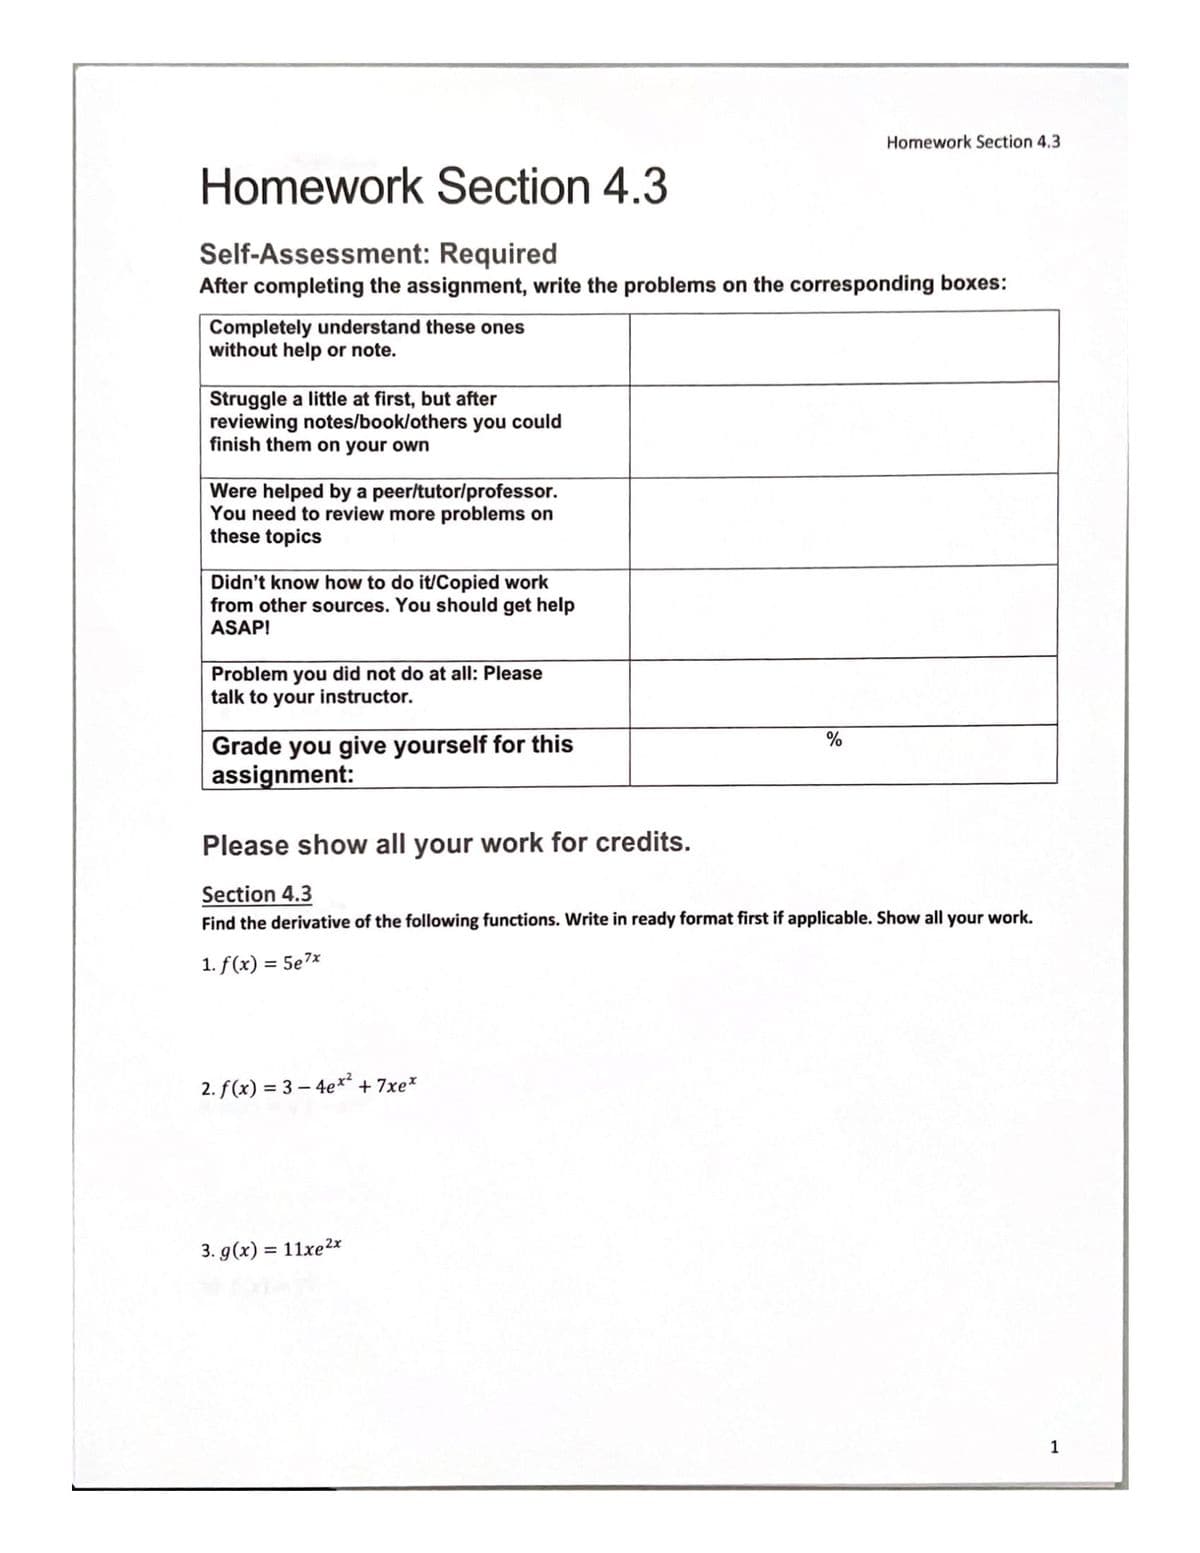 Homework Section 4.3
Self-Assessment: Required
After completing the assignment, write the problems on the corresponding boxes:
Completely understand the ones
without help or note.
Struggle a little at first, but after
reviewing notes/book/others you could
finish them on your own
Were helped by a peer/tutor/professor.
You need to review more problems on
these topics
Didn't know how to do it/Copied work
from other sources. You should get help
ASAP!
Problem you did not do at all: Please
talk to your instructor.
Grade you give yourself for this
assignment:
2. f(x) = 3-4ex² +7xe*
Homework Section 4.3
%
Please show all your work for credits.
Section 4.3
Find the derivative of the following functions. Write in ready format first if applicable. Show all your work.
1. f(x) = 5e7x
3. g(x) = 11xe 2x
1